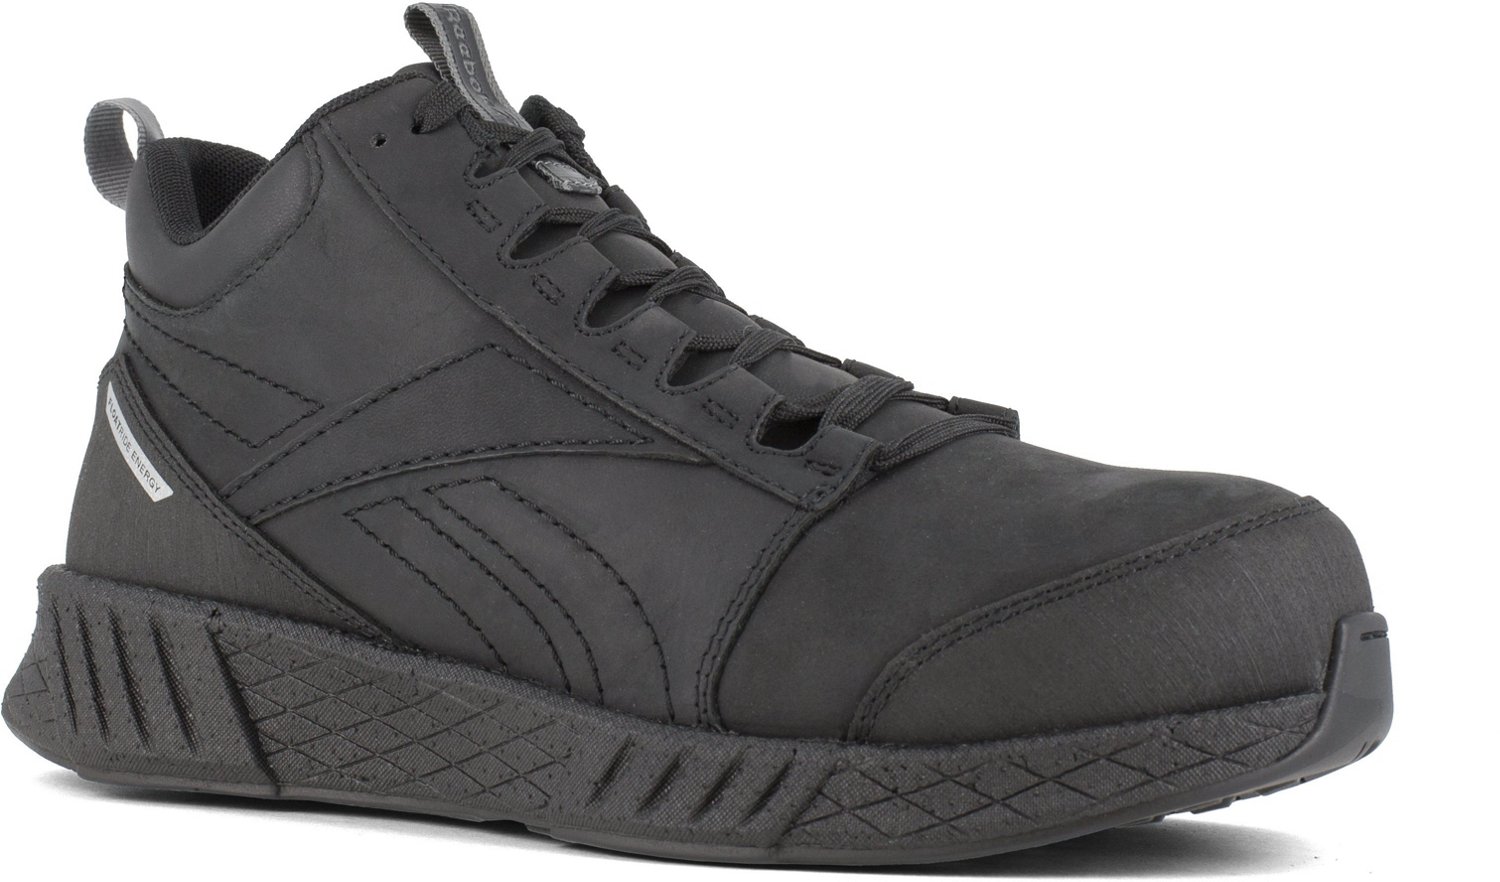 Reebok Men's Fusion Formidable Athletic Mid Cut Work Boots | Academy